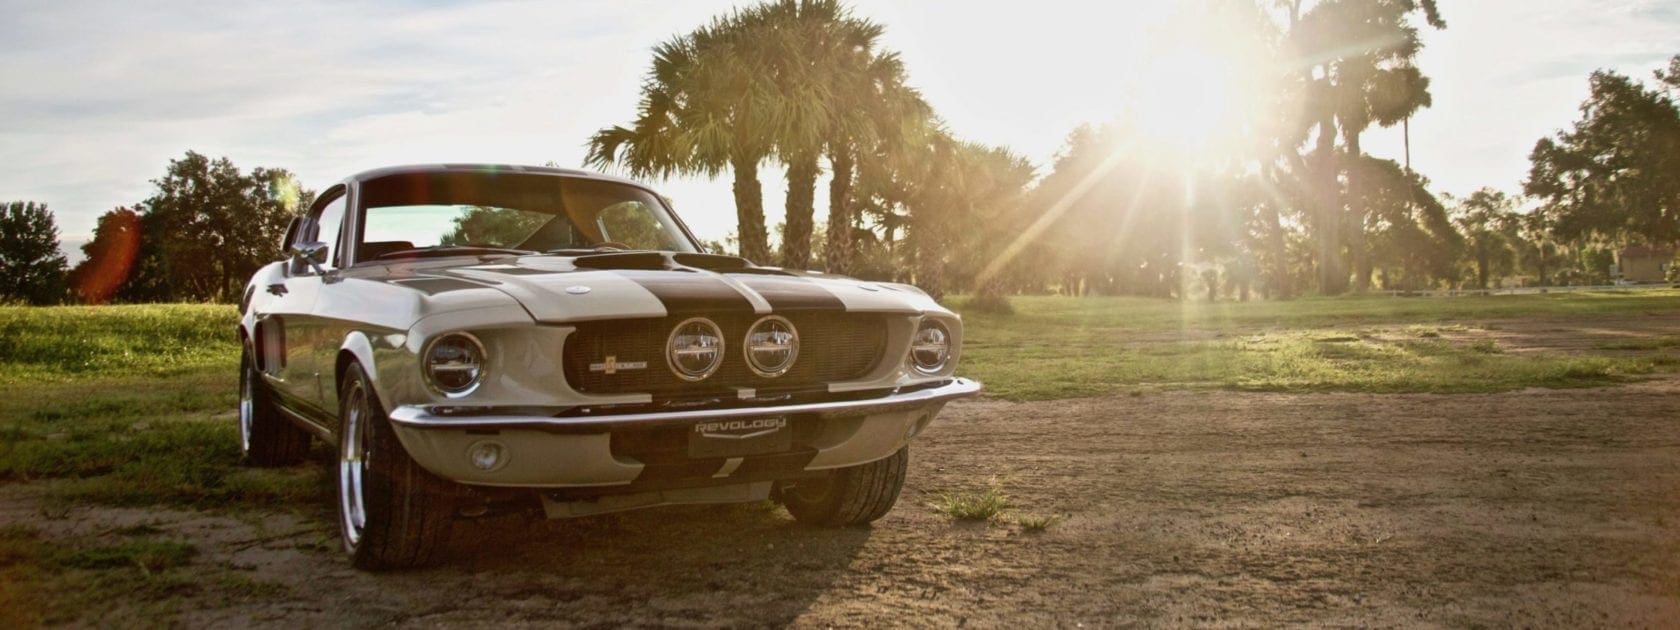 Revology Mustang startup goes back to the future